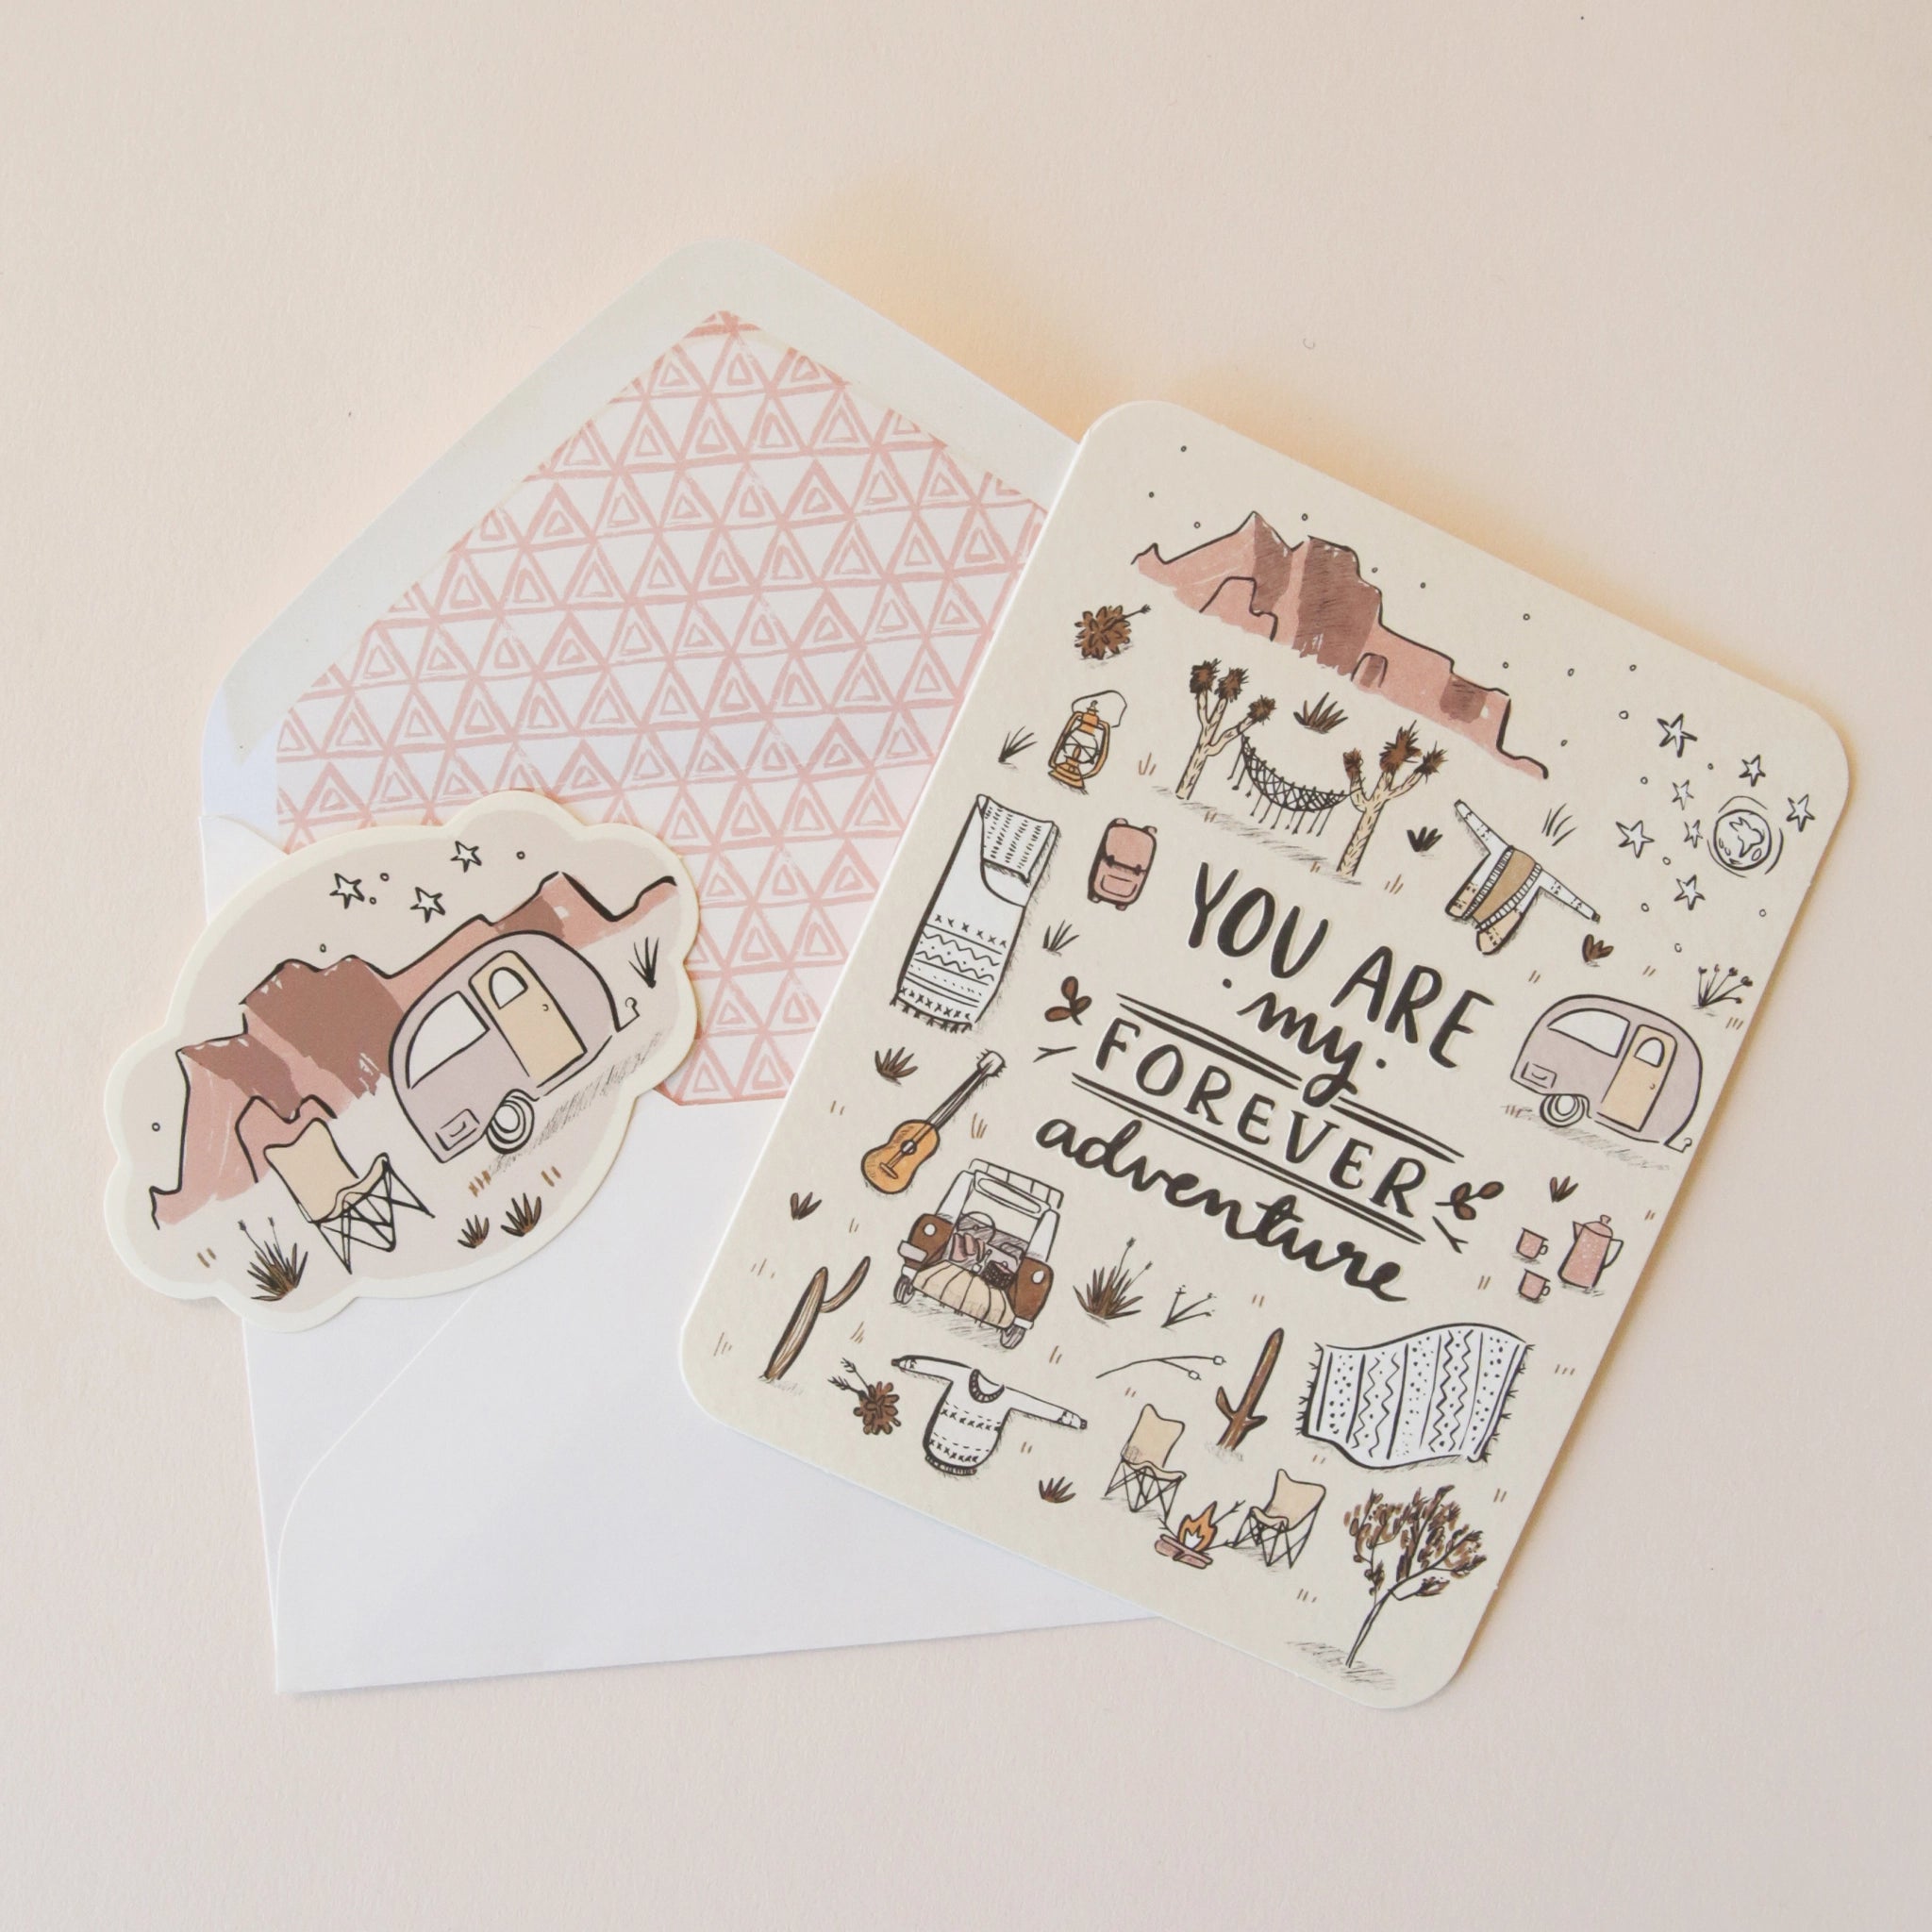 On a neutral background is an ivory card with text in the center that reads, &quot;You Are My Forever Adventure&quot; along with illustrations of various desert camping and road-tripping items, like a camper, a hammock, stars, a campfire and chairs etc as well as a sticker that is included with purchase.